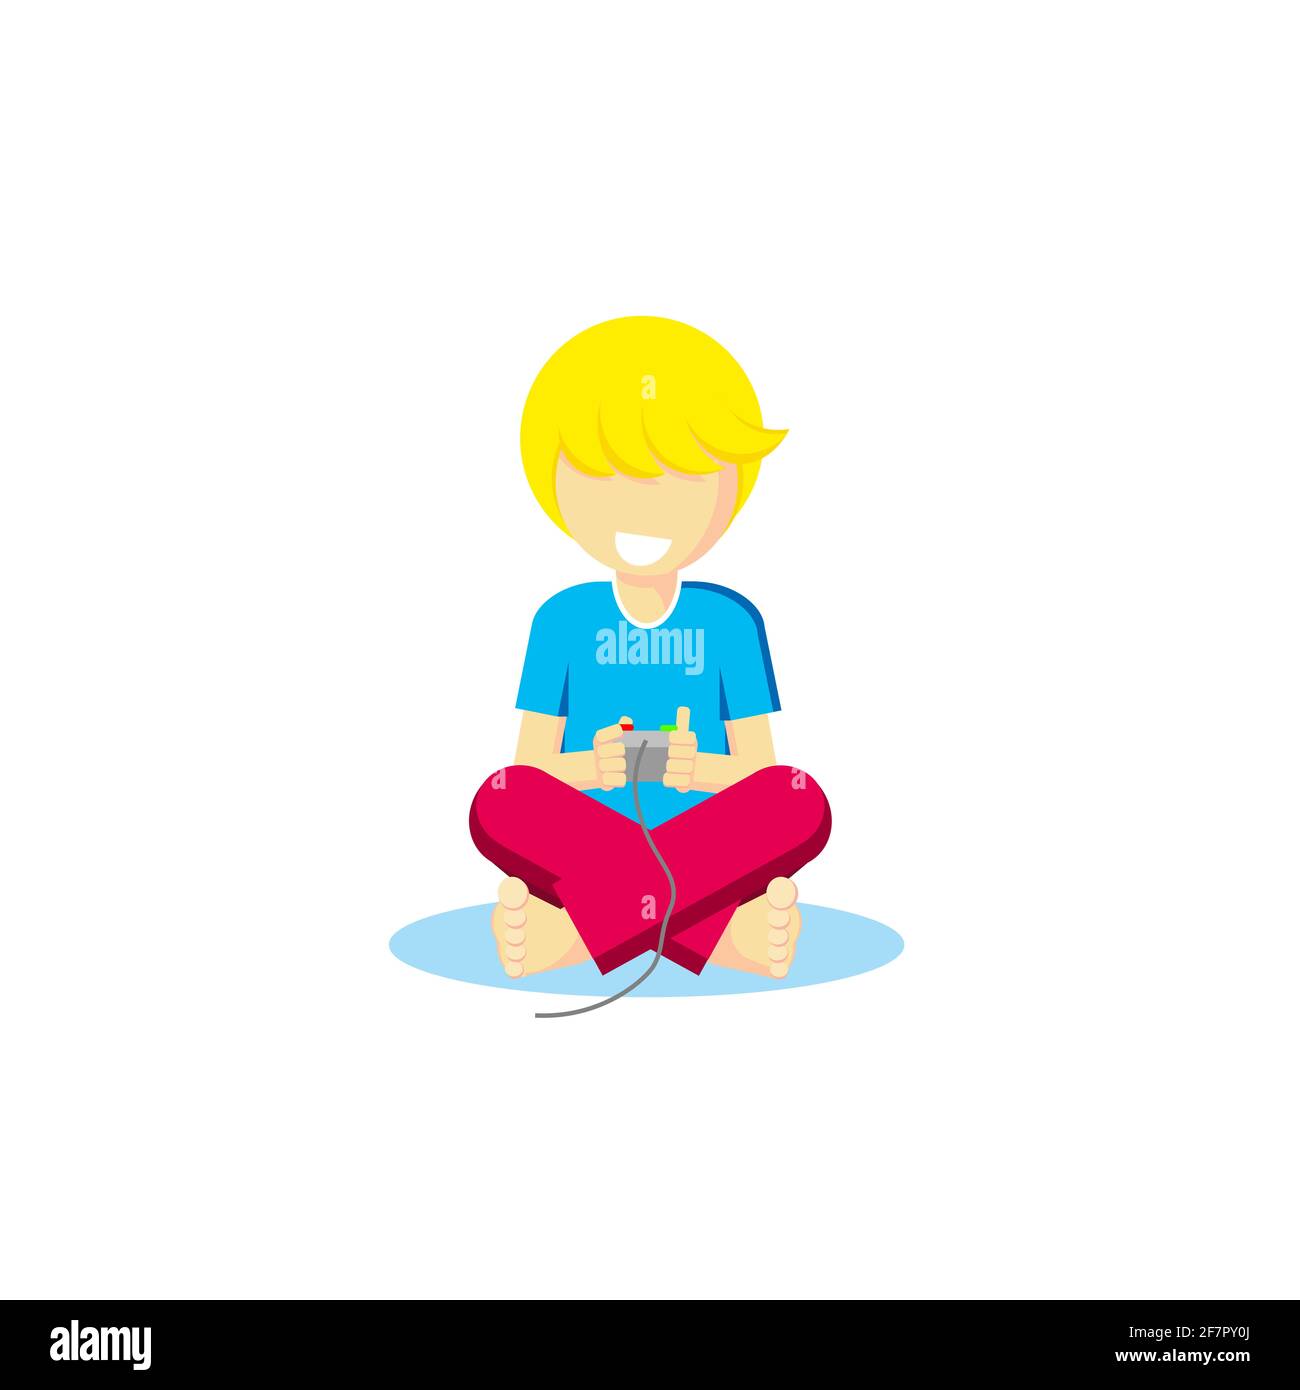 Vector boy barefoot blond sits cross-legged plays console gameboy computer game xbox joystick smiles laughs joy child childhood pupil leisure 3D Stock Photo